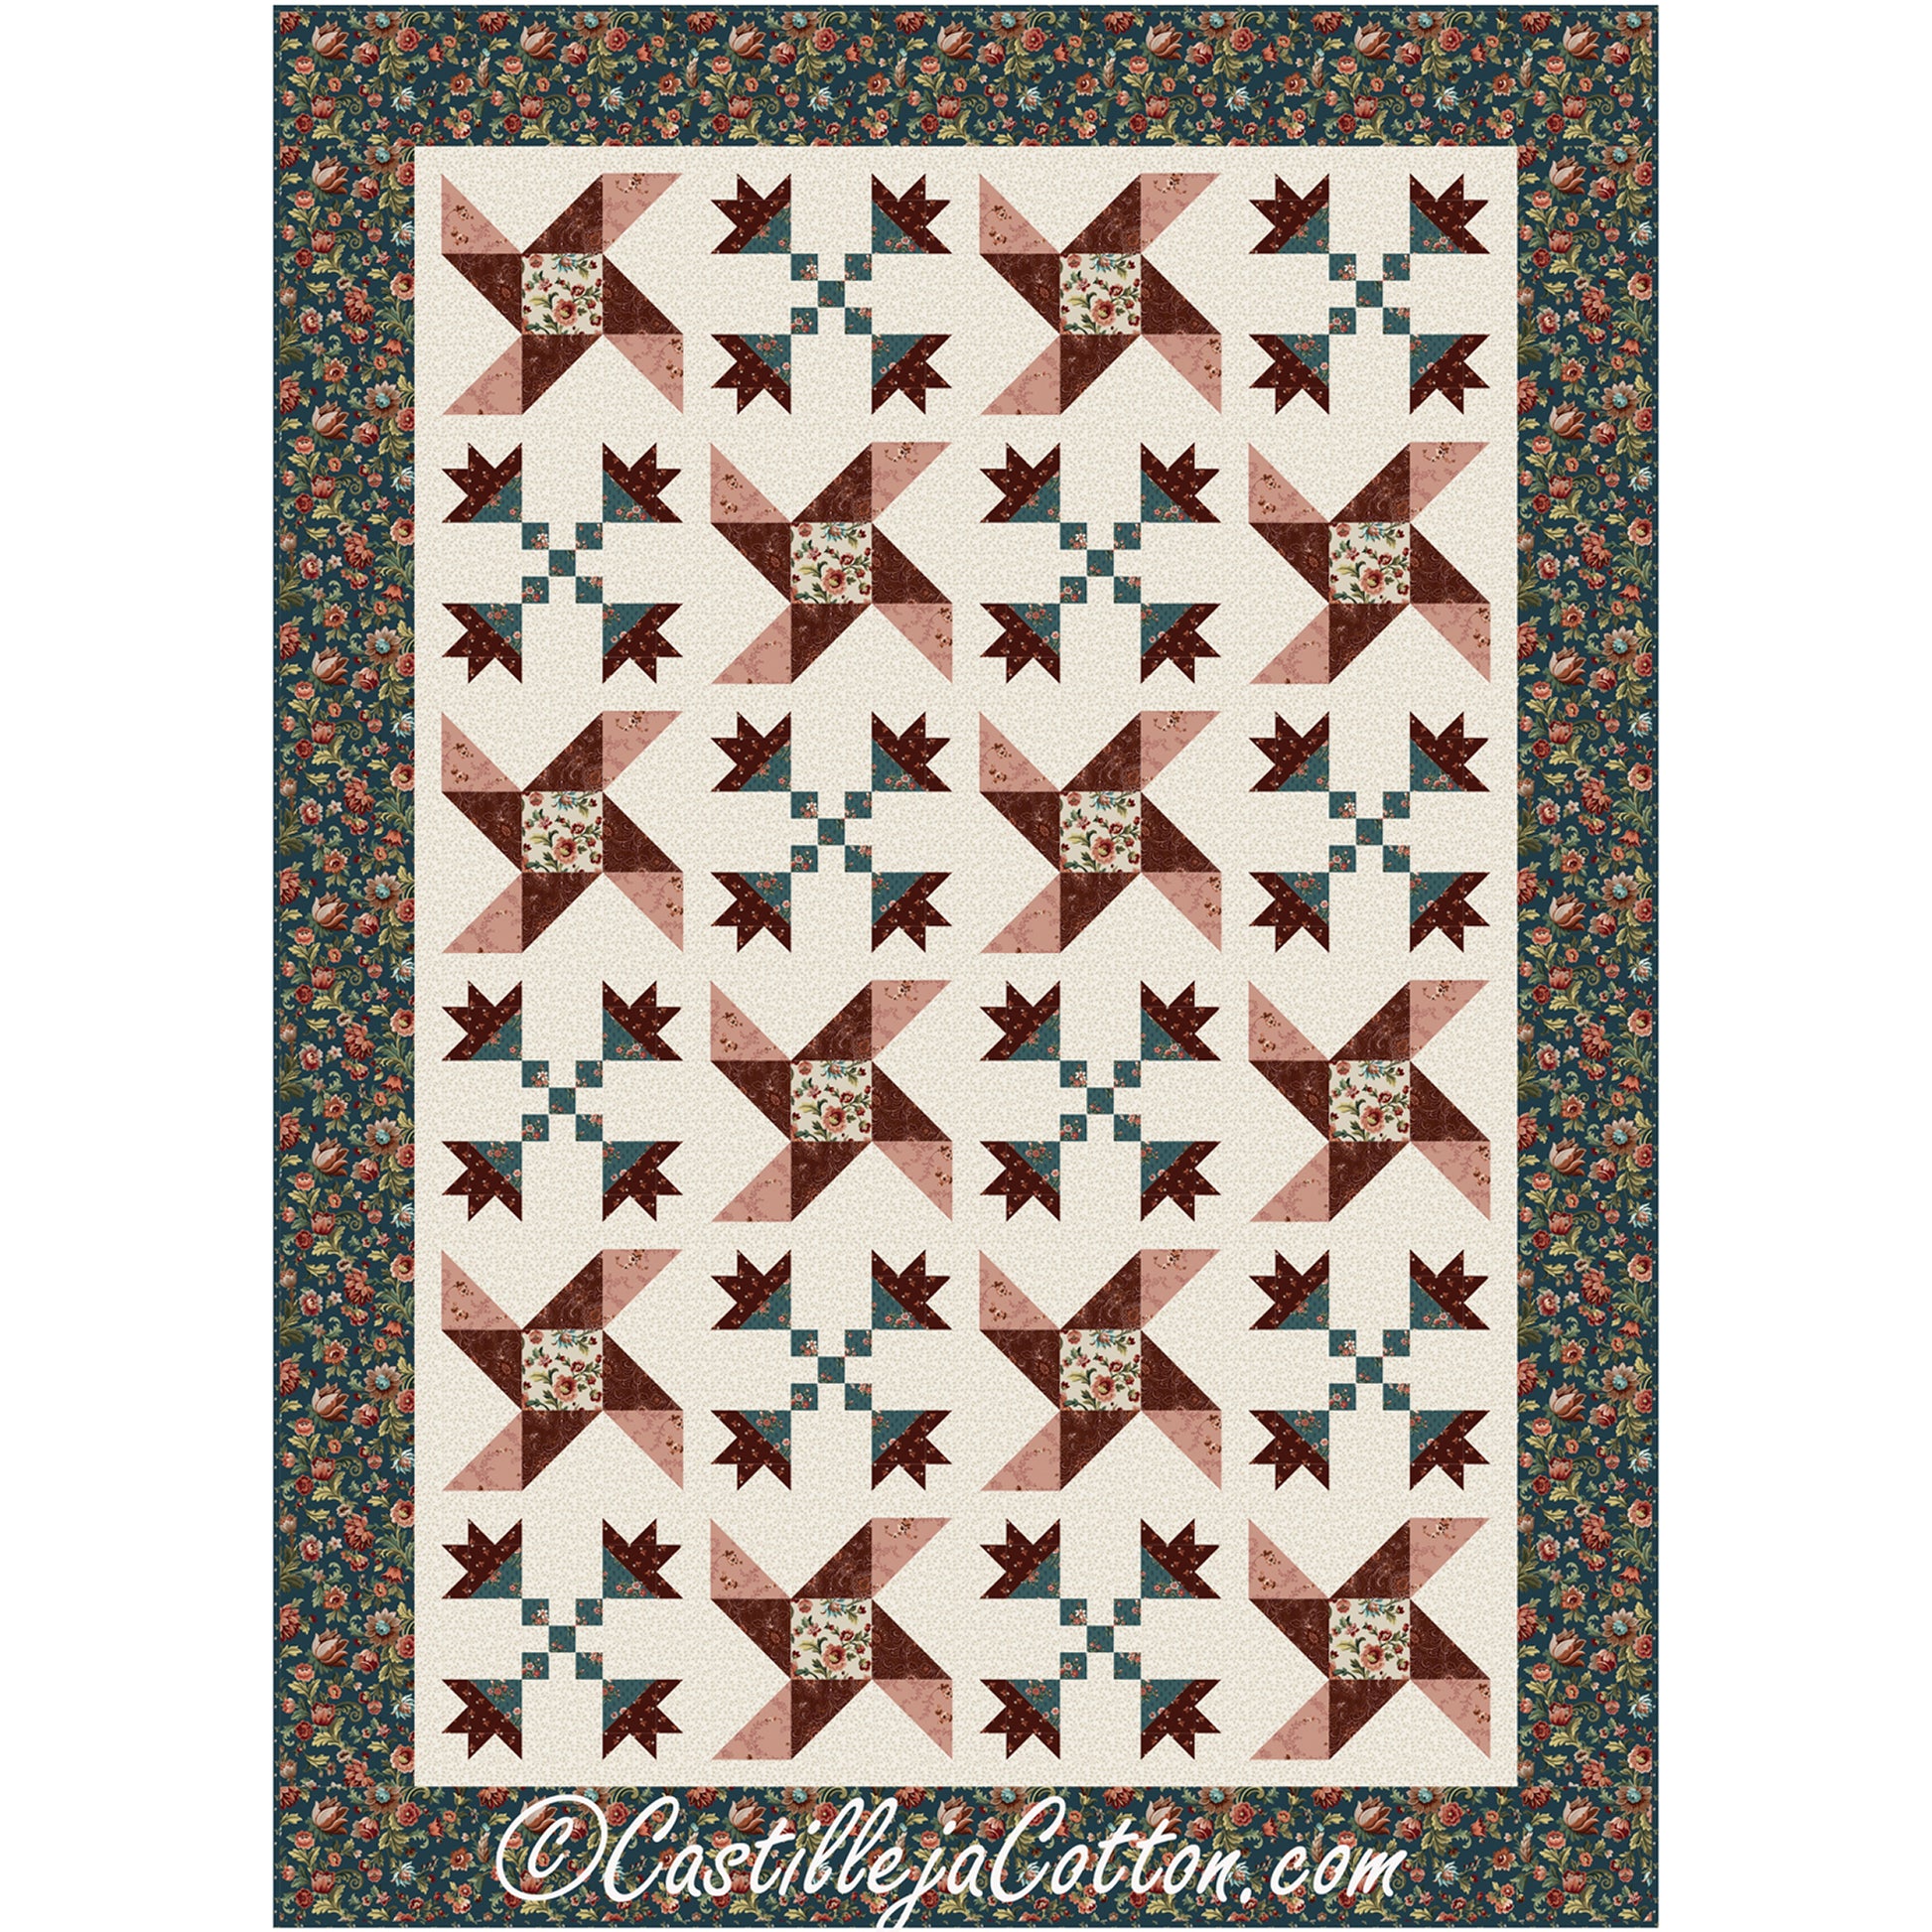 Beautiful quilt in mostly brown and pink with denim blue and cream with a flowers and pinwheel design.